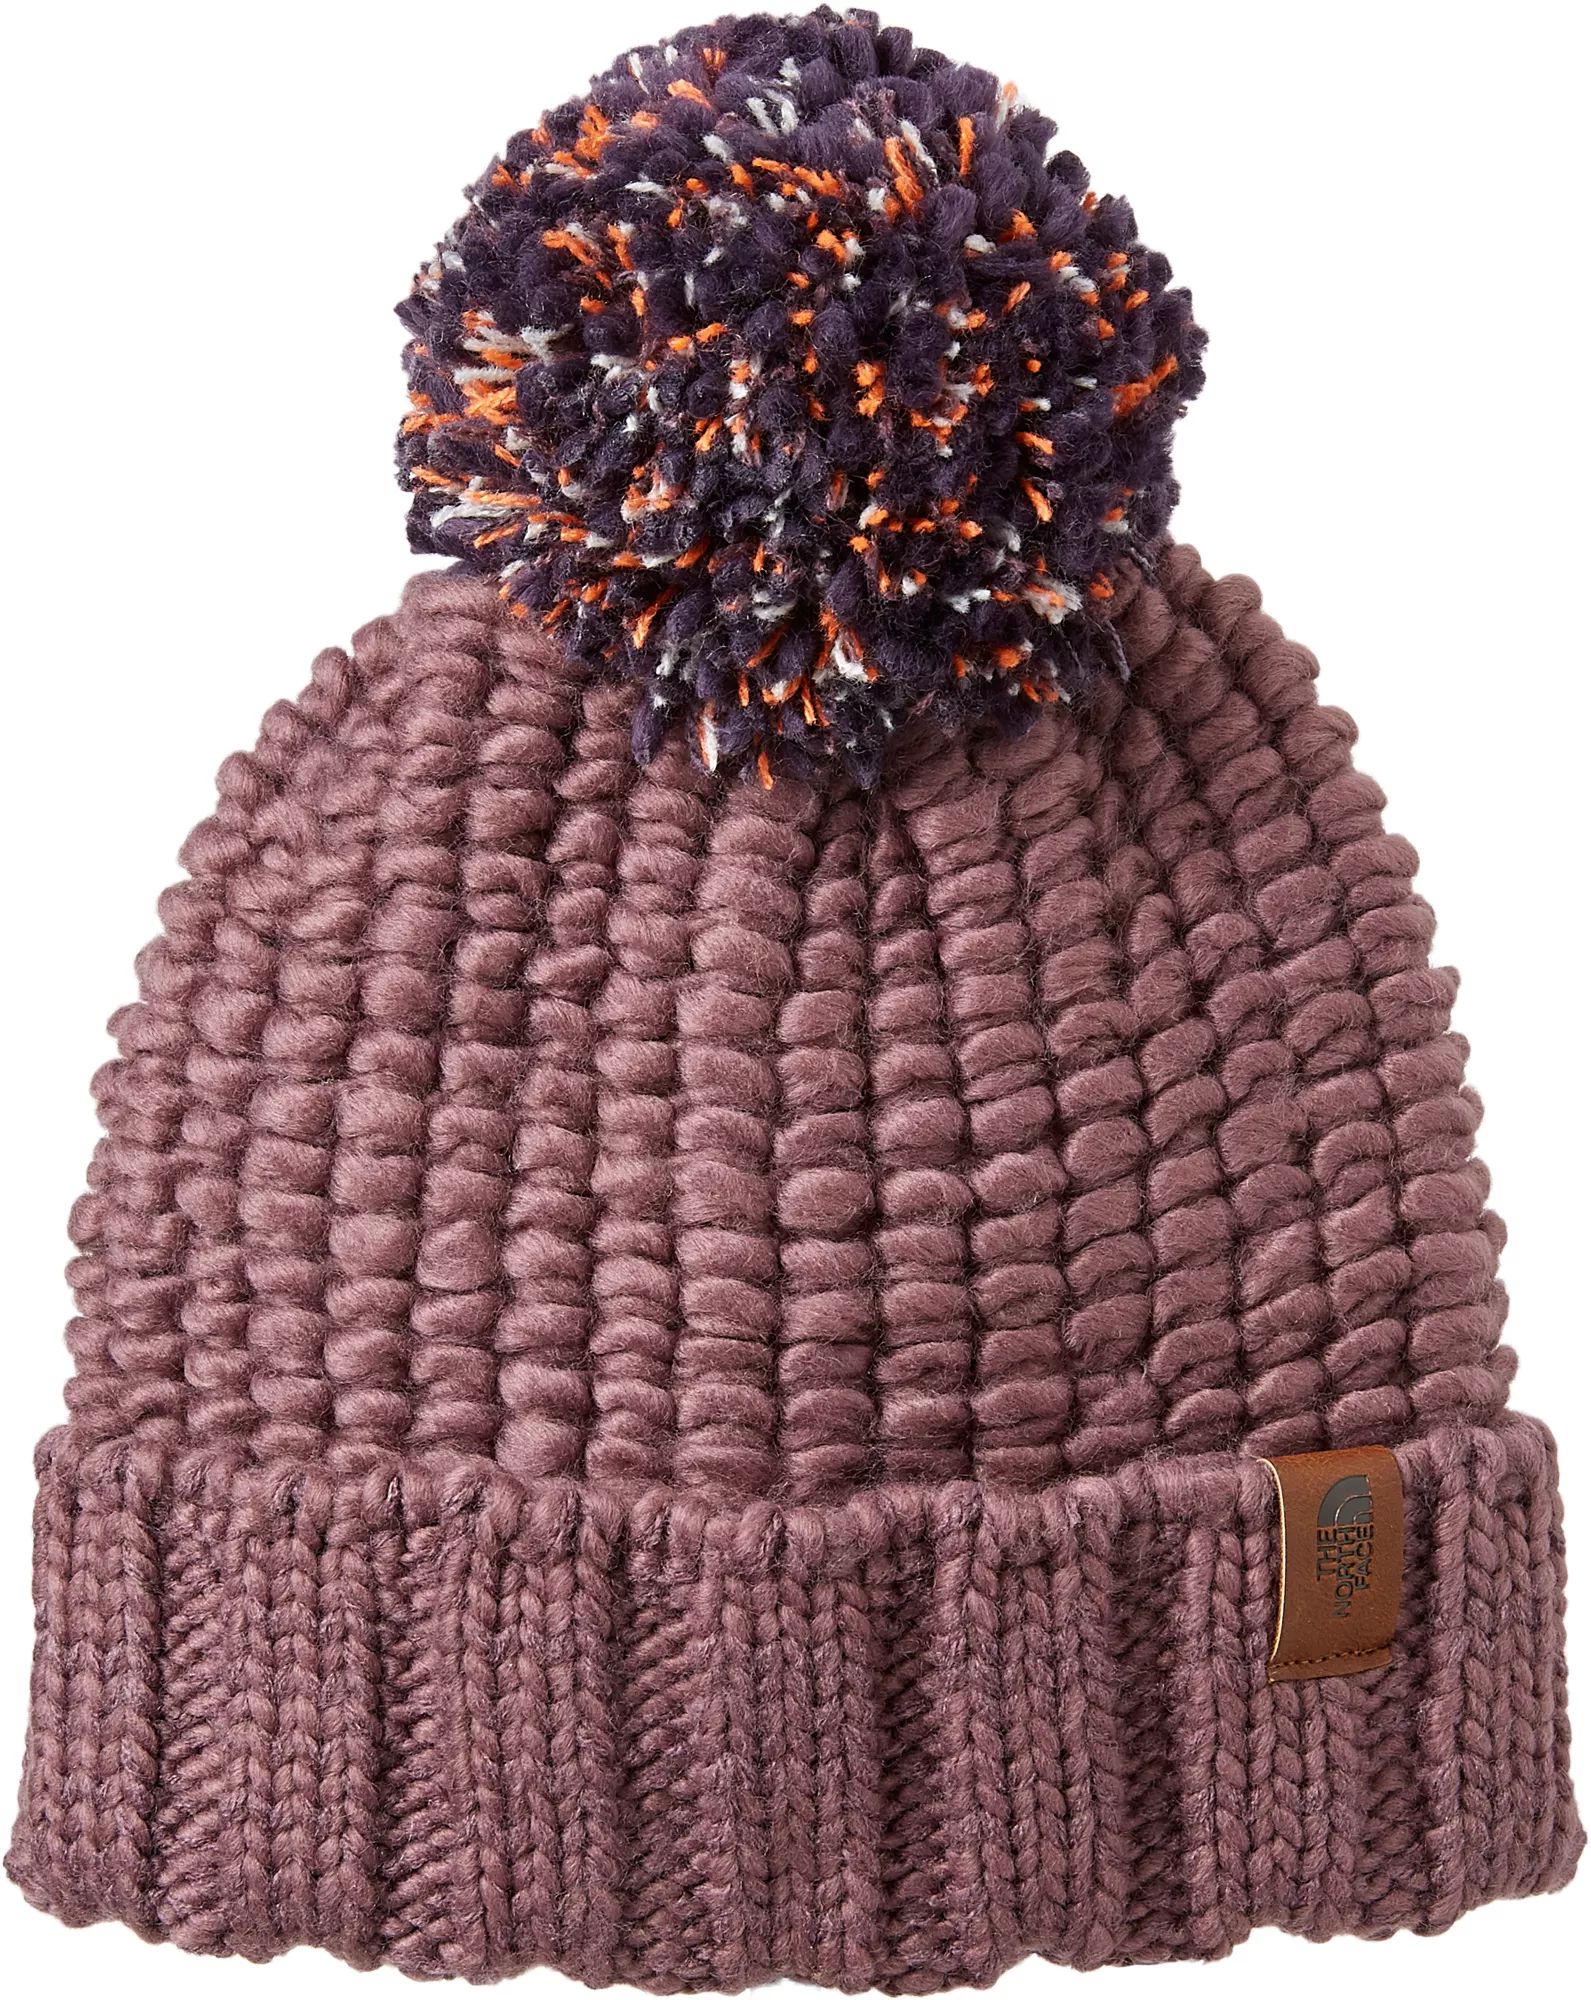 The North Face Women's Cozy Chunky Beanie, Black Plum | Dick's Sporting Goods